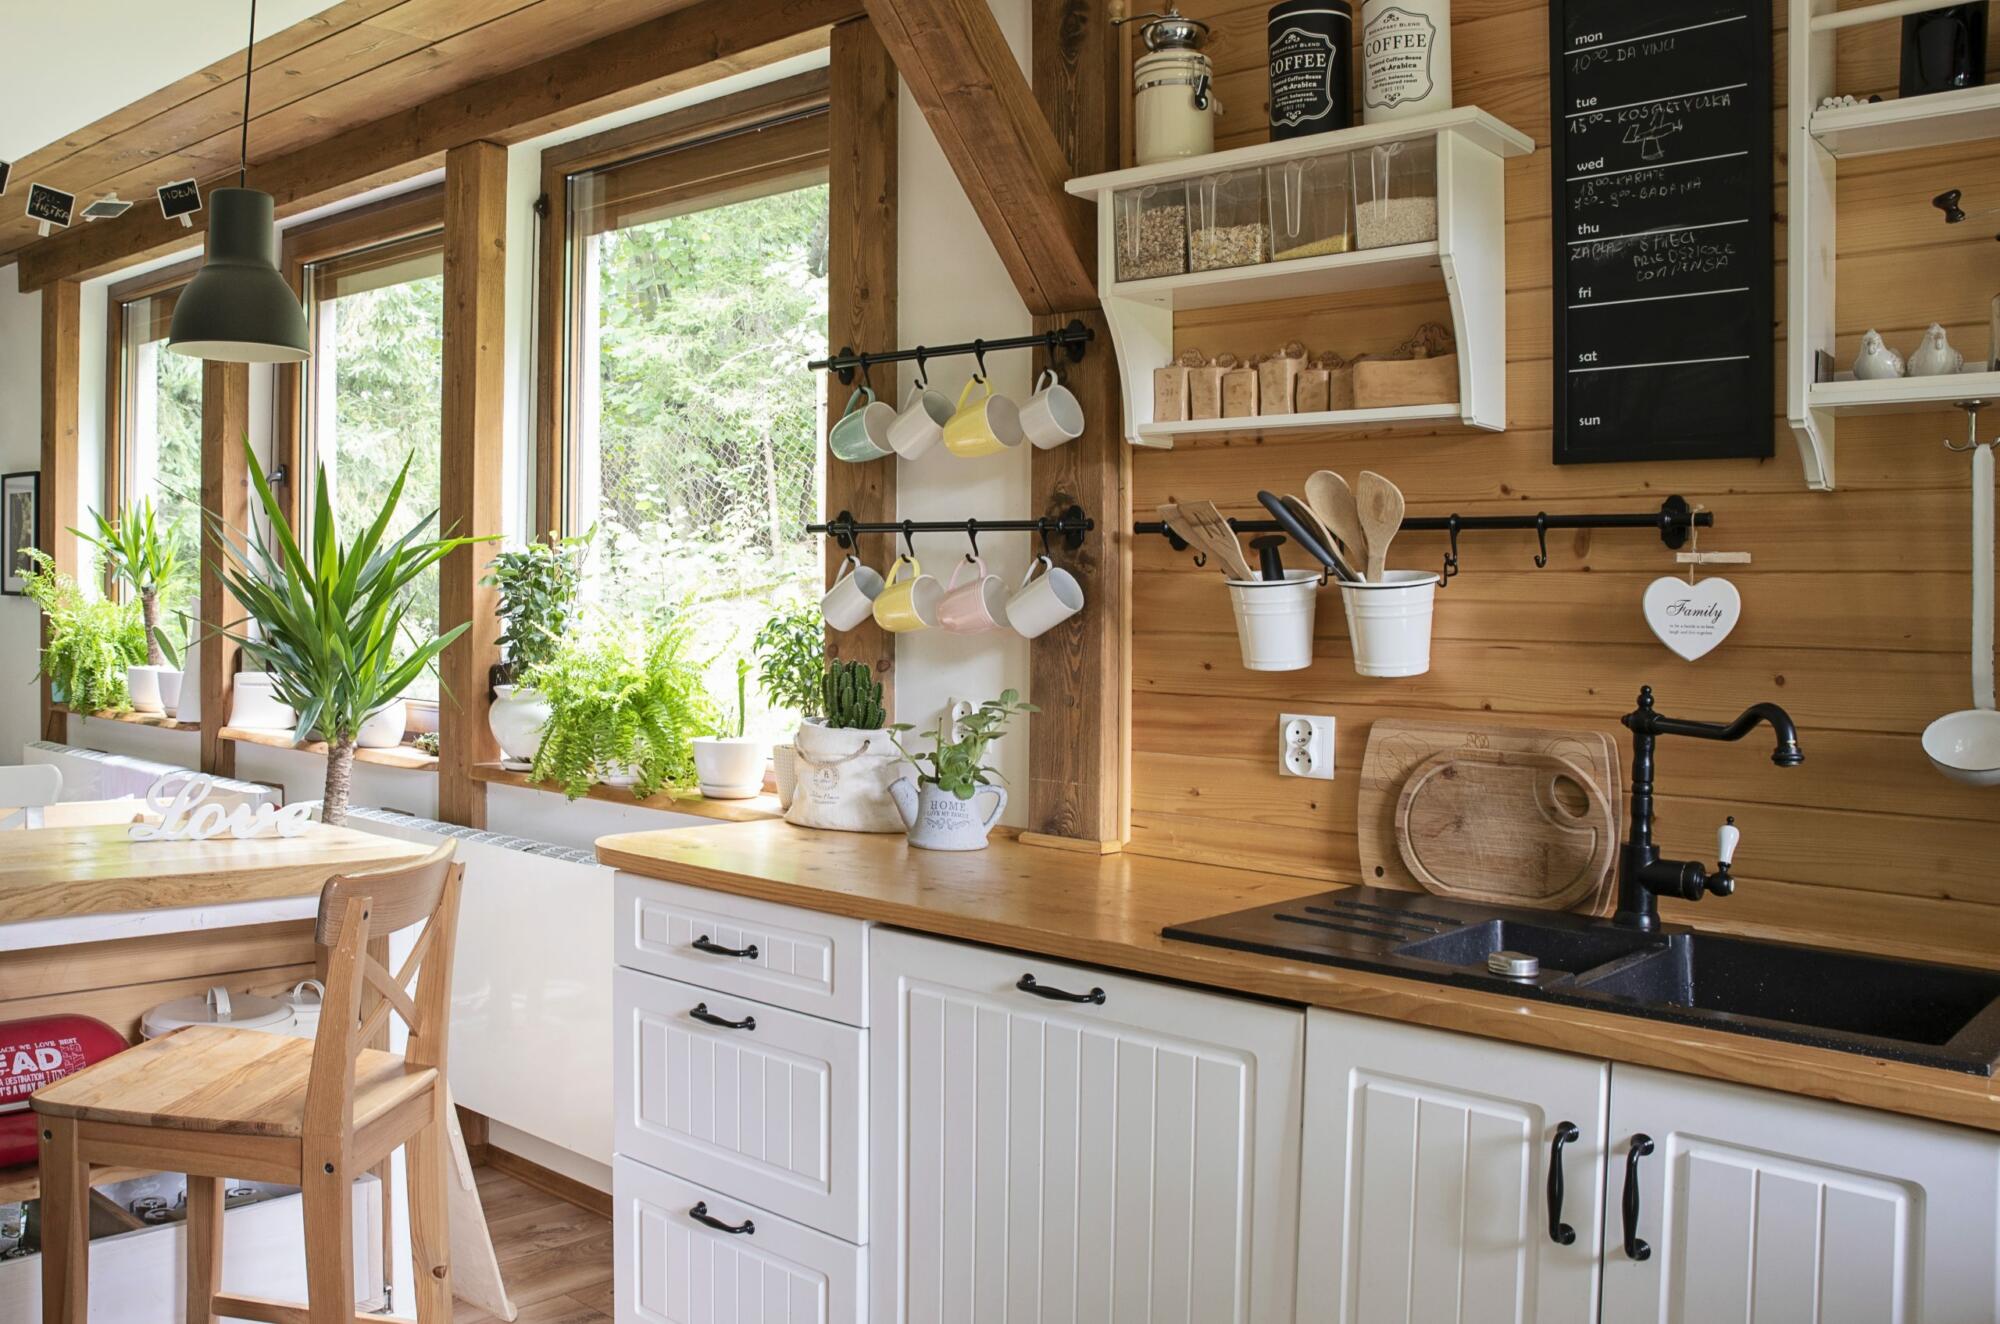 Cozy rustic kitchen interior with plants and natural light.